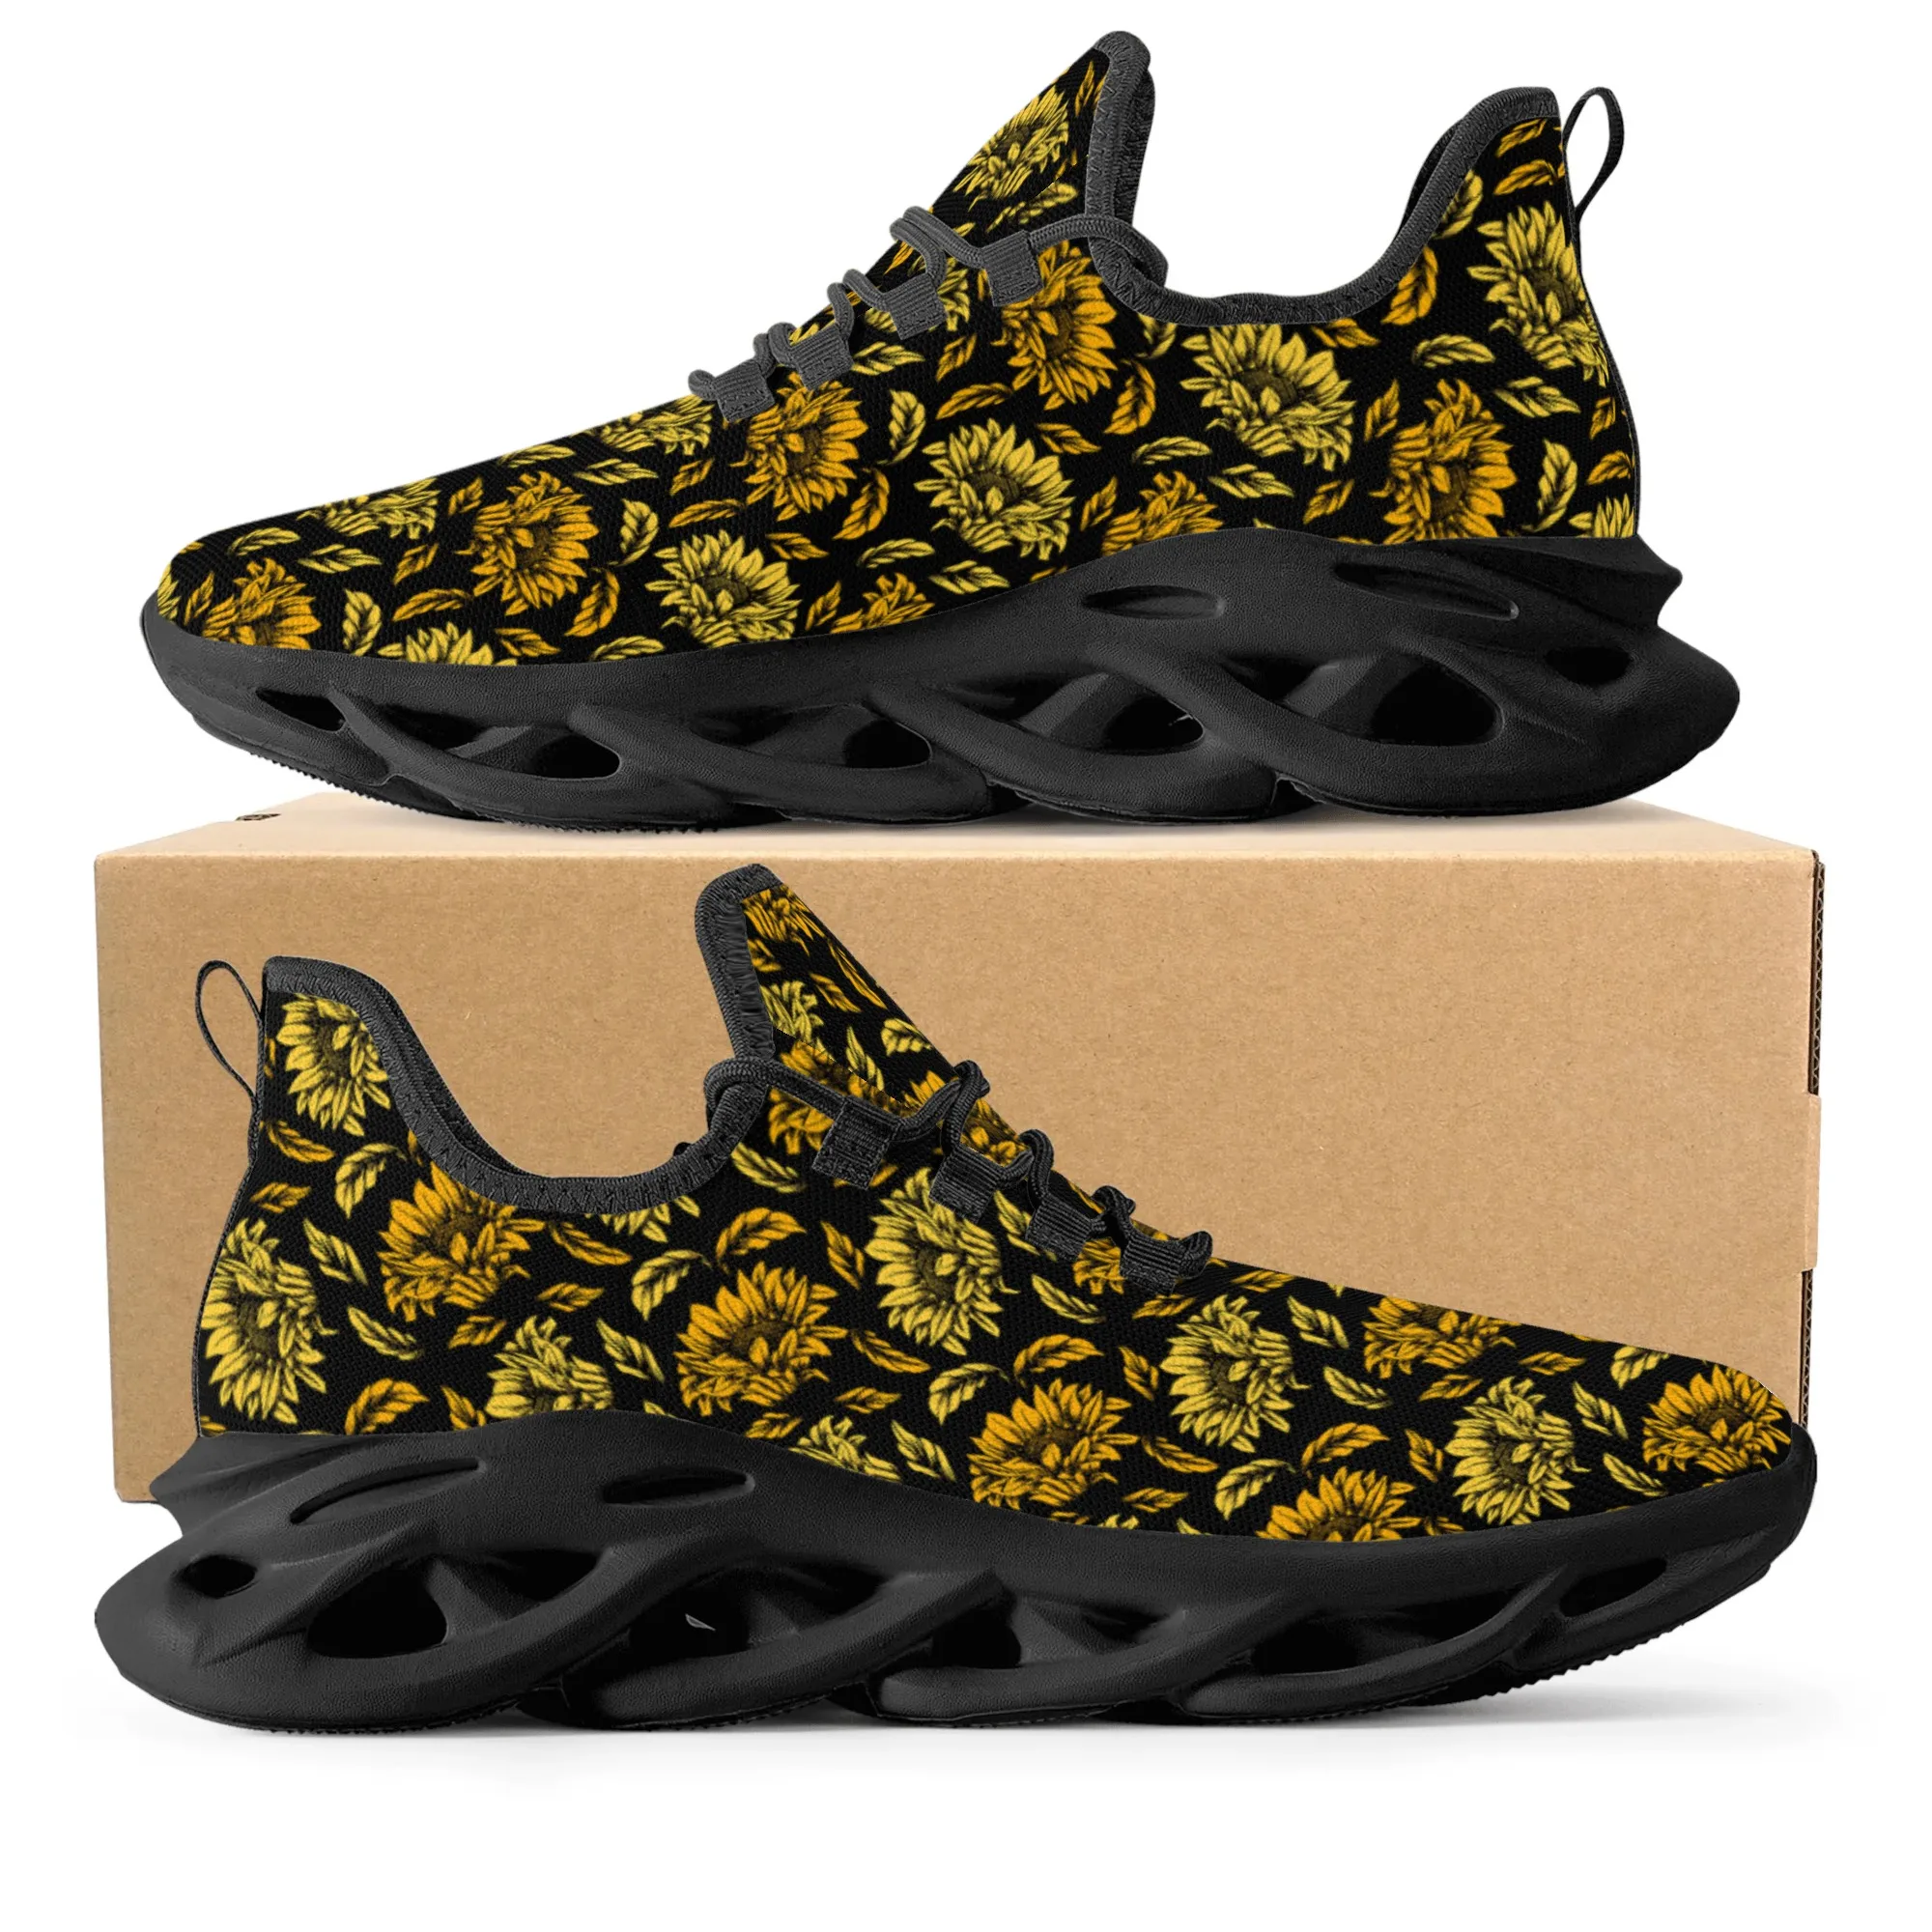 Sunflowers Print Design Fashion Funny Sneakers Men Women Teenager Breathable Mesh Casual Running Shoes Lace-Up Basketball Shoe men casual shoes fish scale blade lace up comfortable sports men breathable gym mesh running mesh fashion shoes sneakers unisex